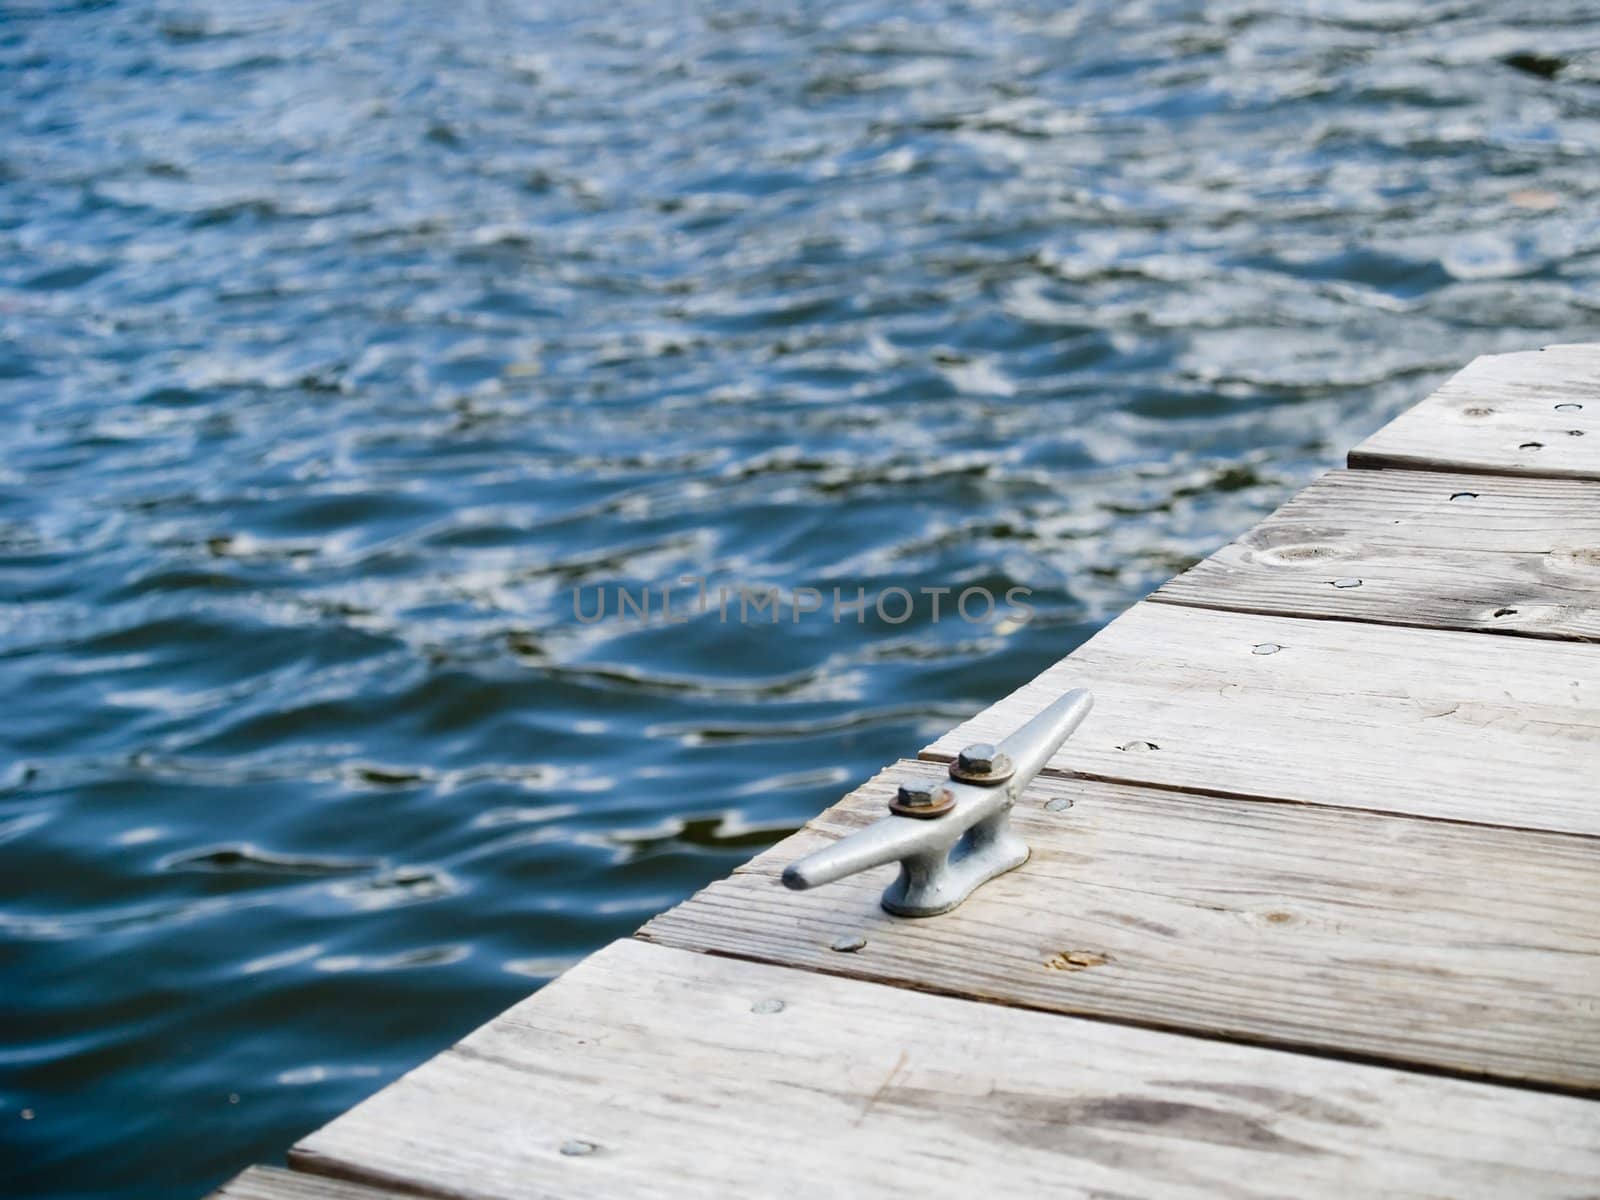 Dock on a lake in the mountains